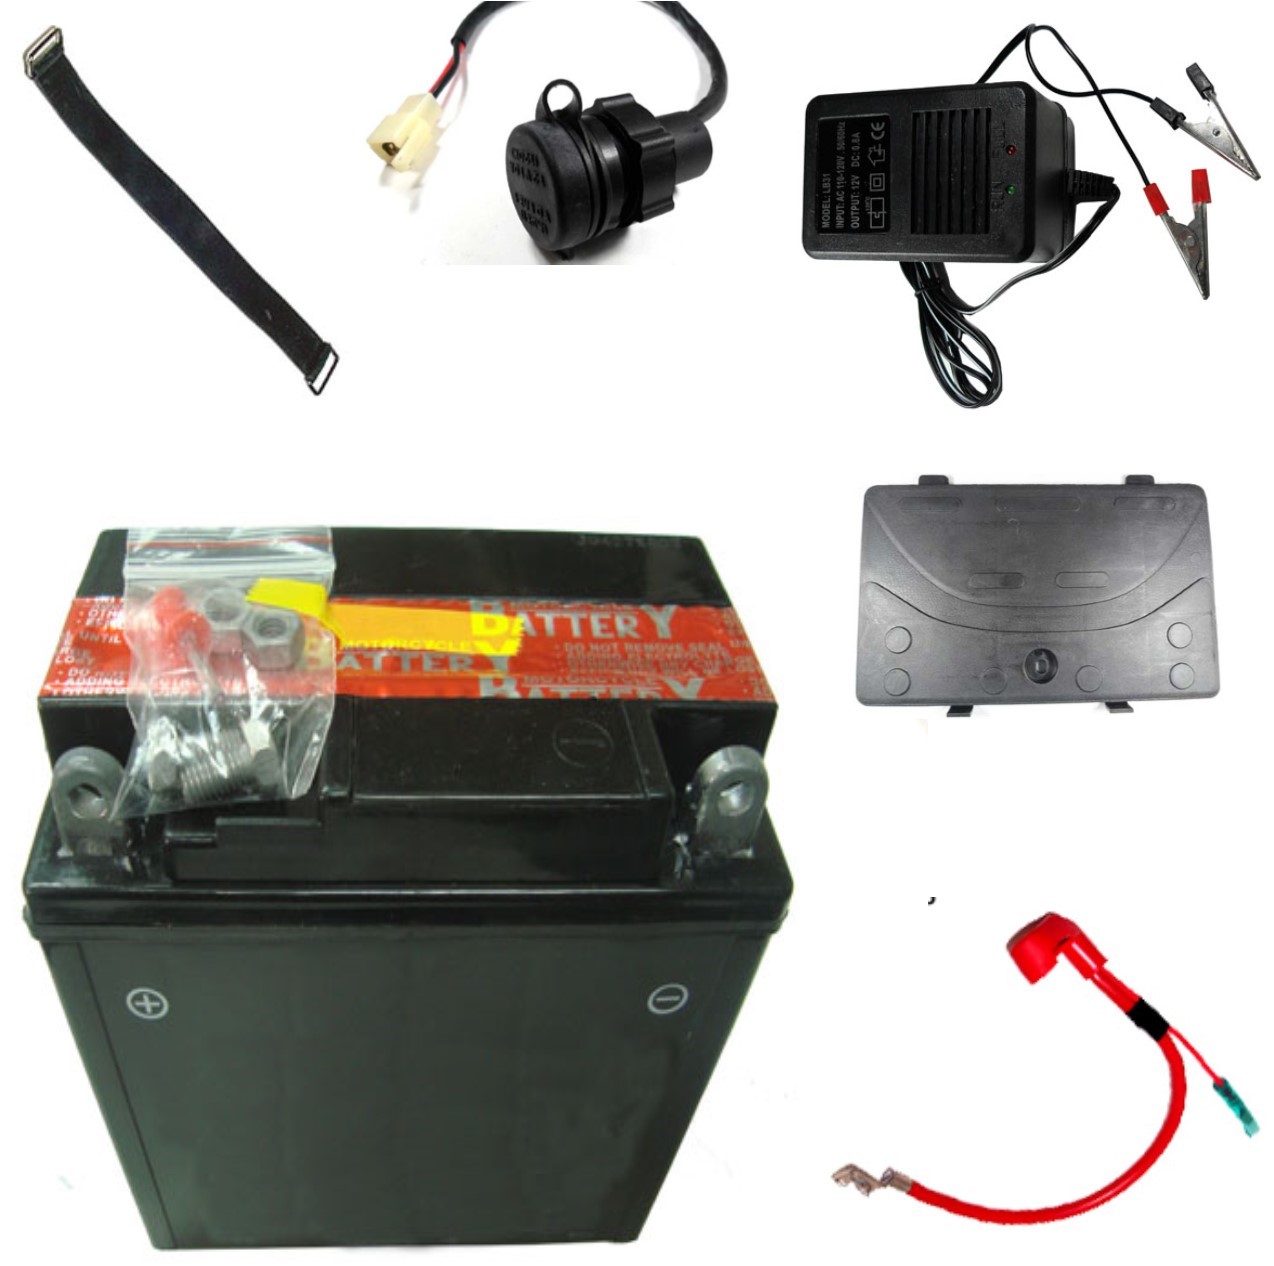 Batteries - Battery Chargers Cables - Pads - Brackets